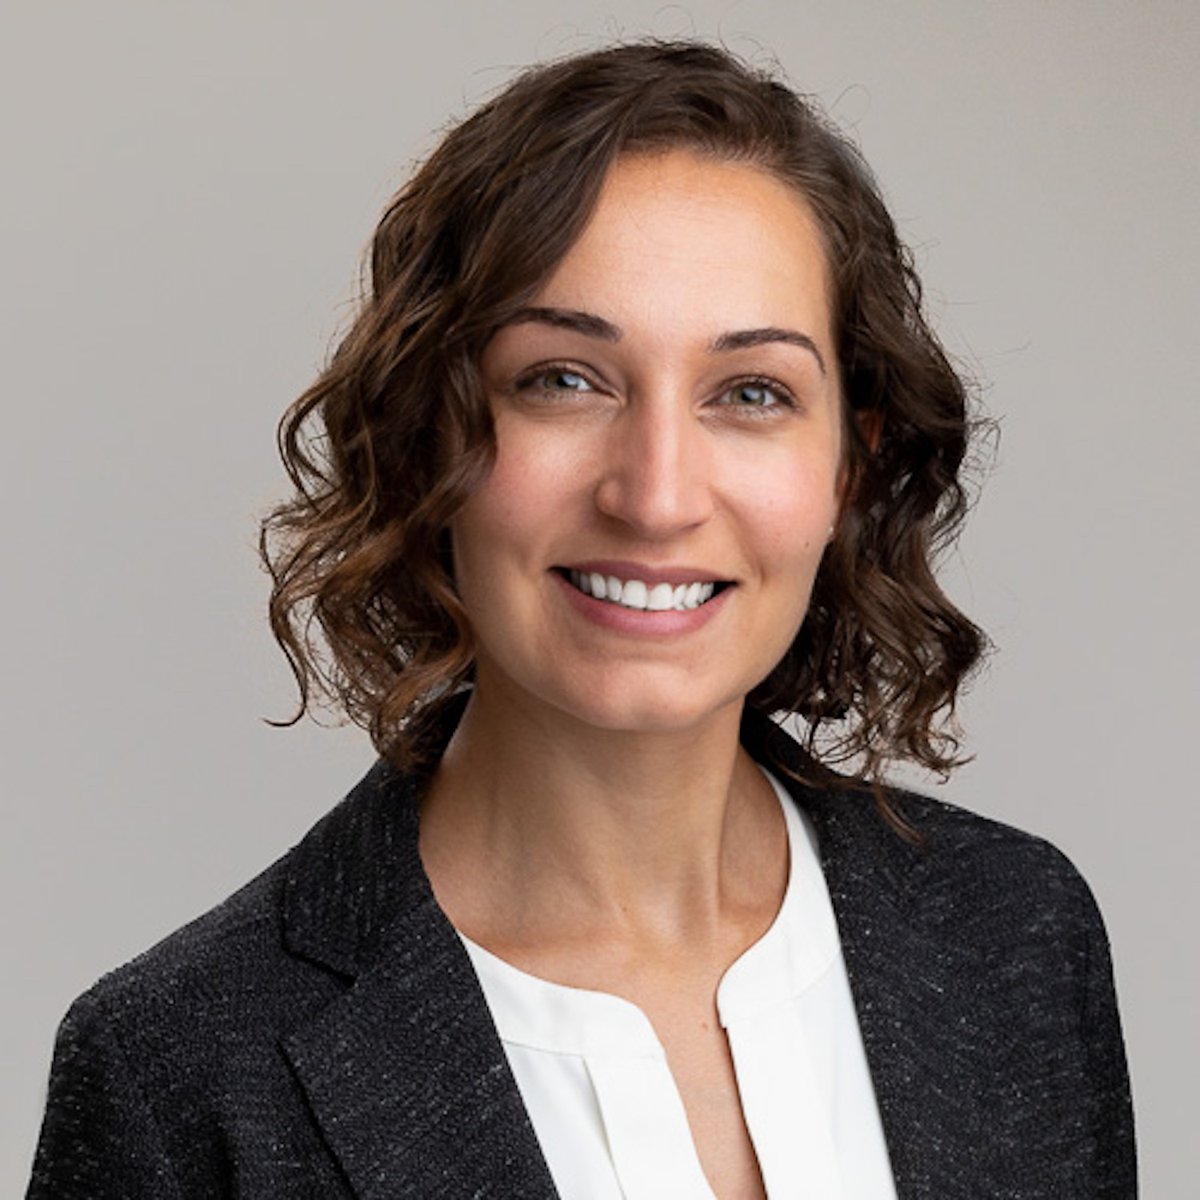 Erica Pimenta, MD, PhD, @DanaFarber has received the #AACR24 QuadW Foundation Sarcoma Research Fellowship in Memory of Willie Tichenor for investigating IGF1 loss as a molecular driver of liposaracoma de-differentiation. ms.spr.ly/6014cFTka